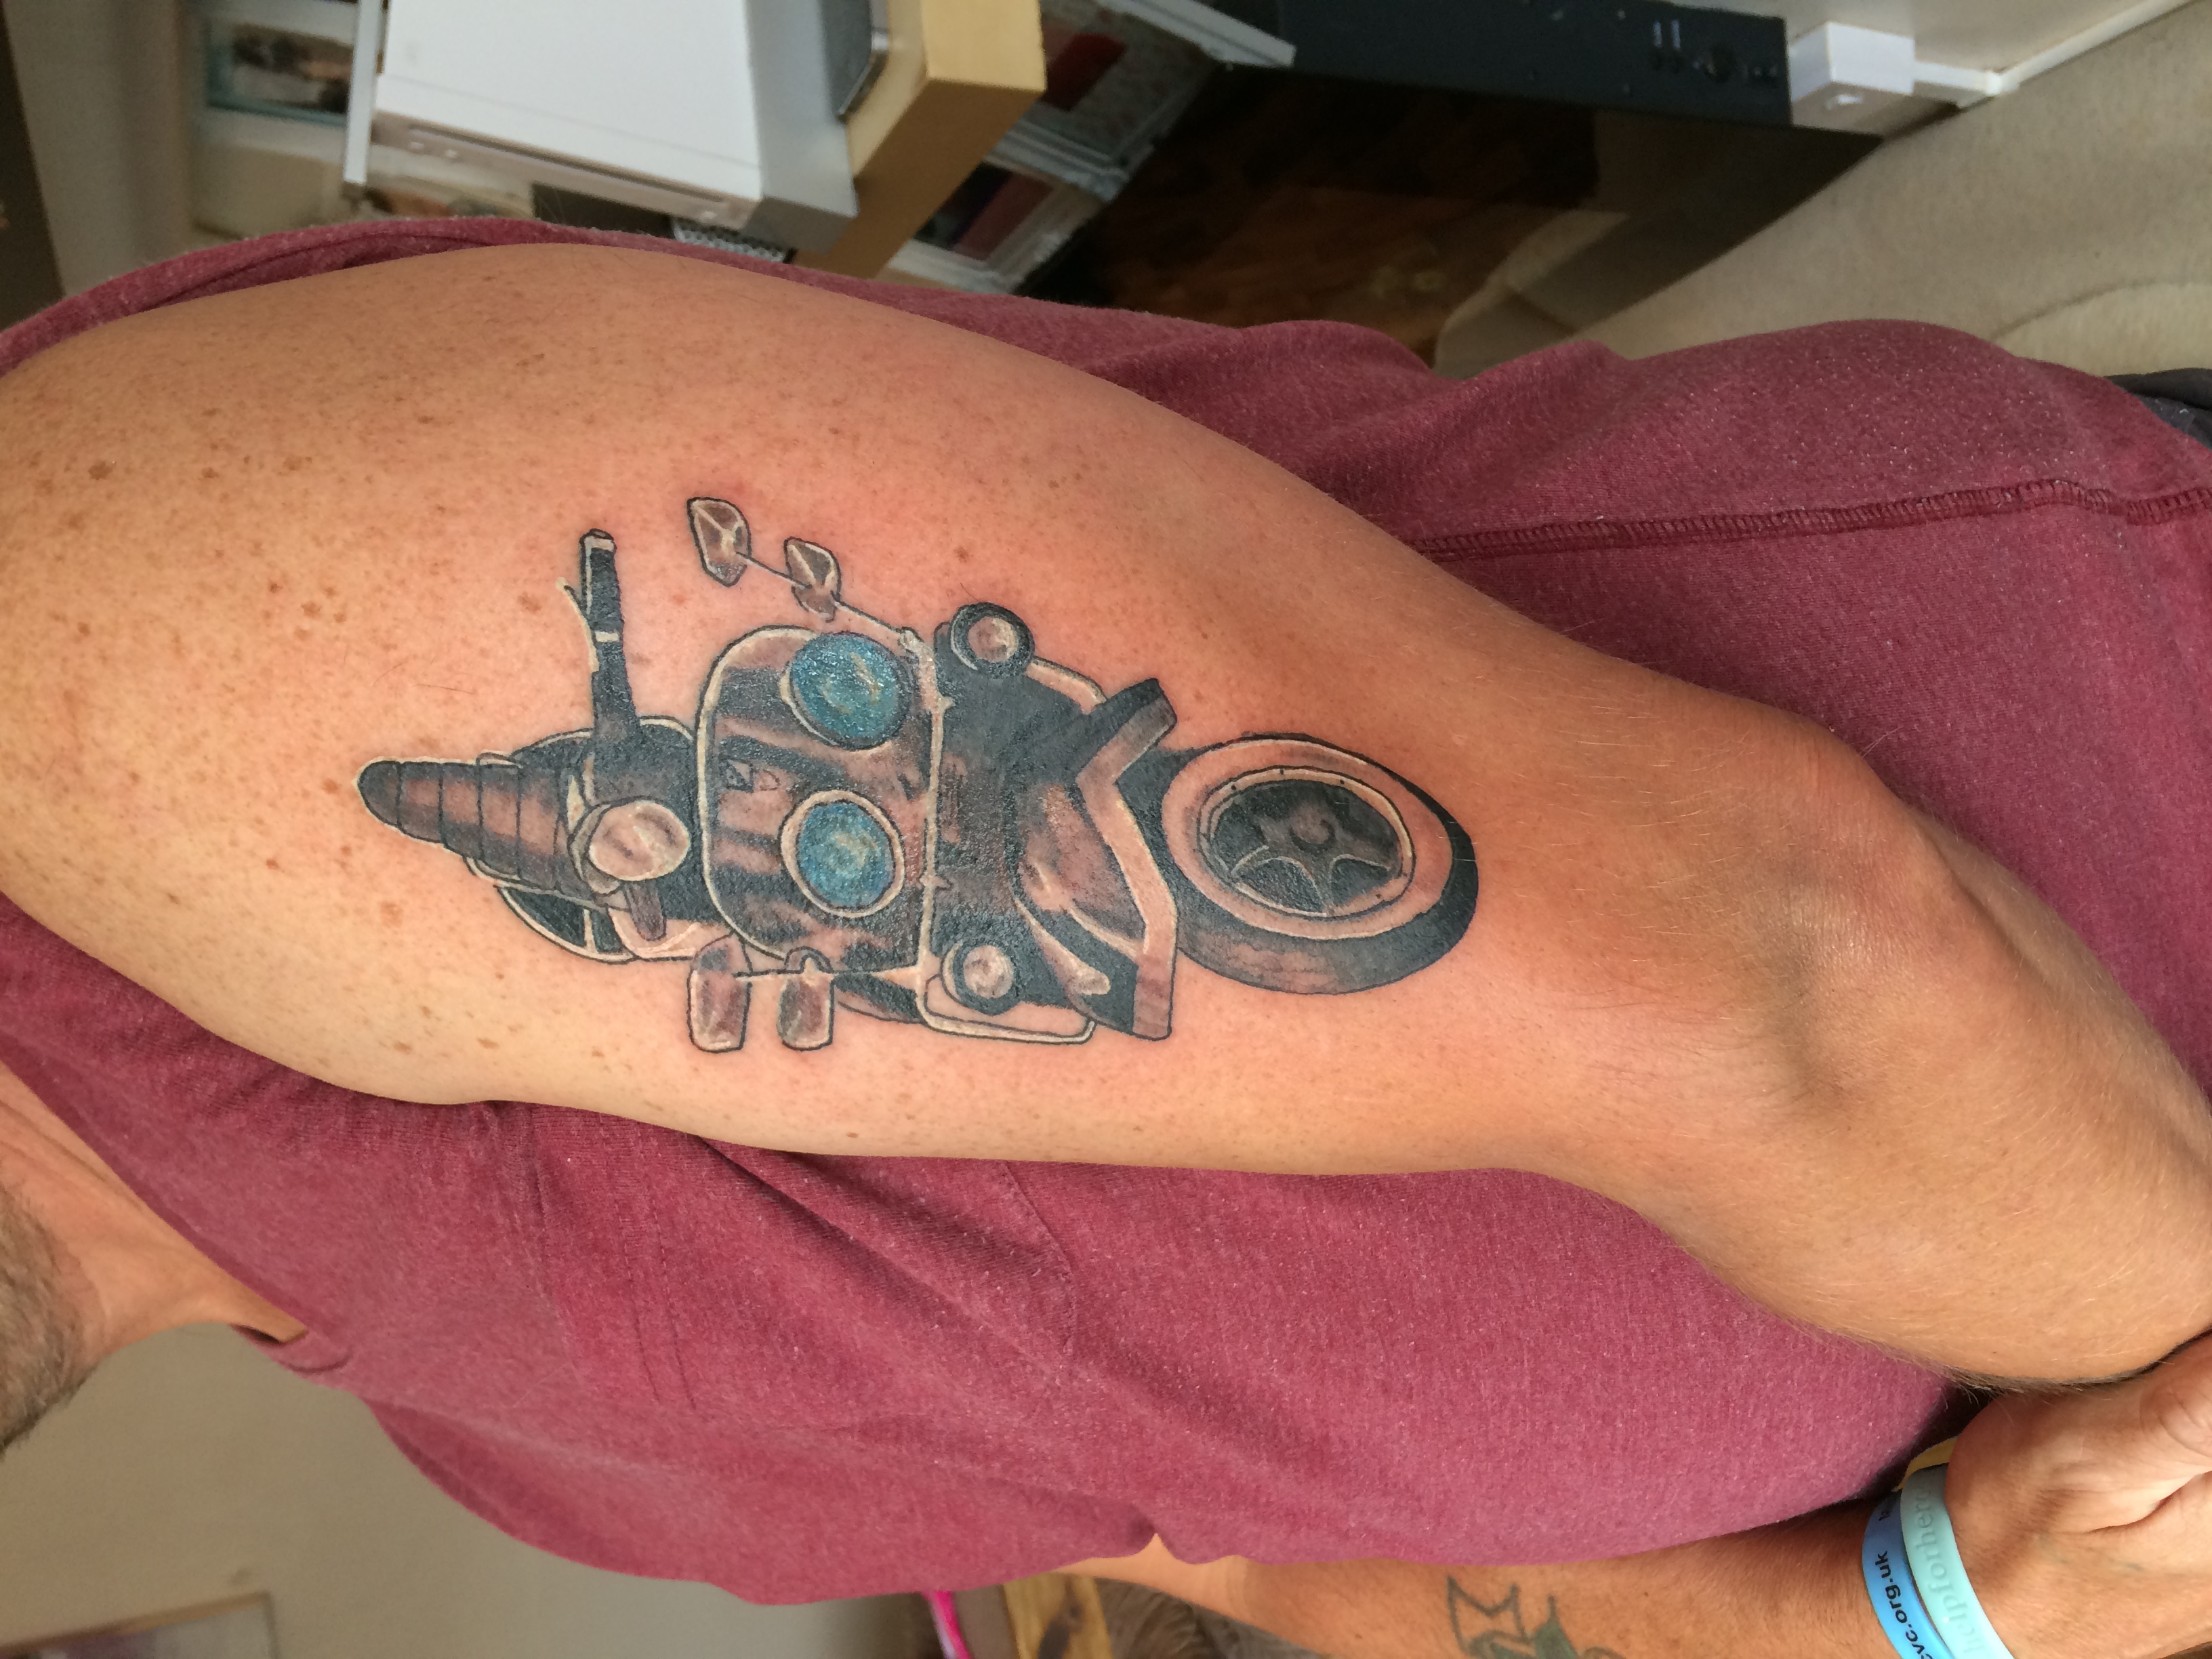 Our scoot – Scooter Tattoo On Bicep